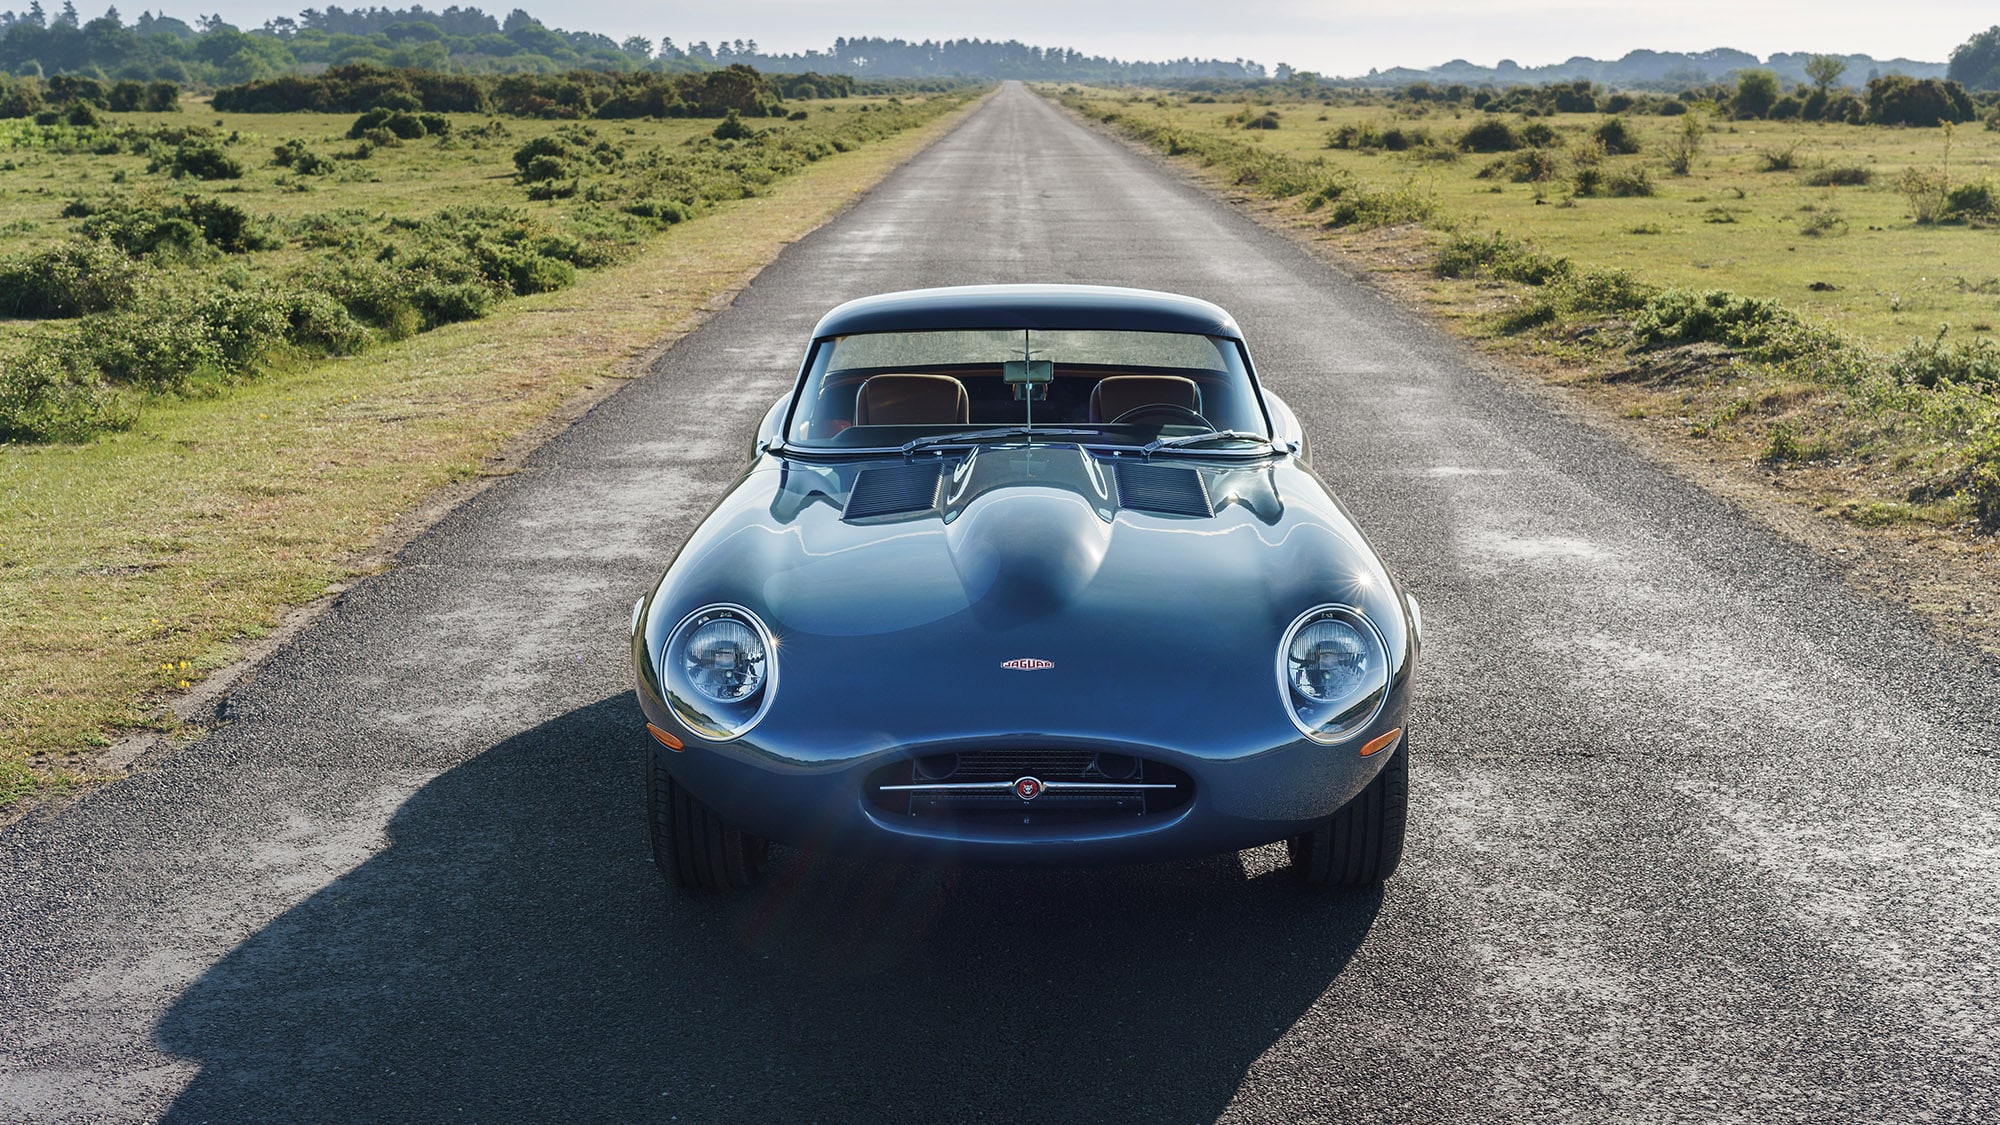 Front shot of the 2020 Eagle E-type Lightweight GT